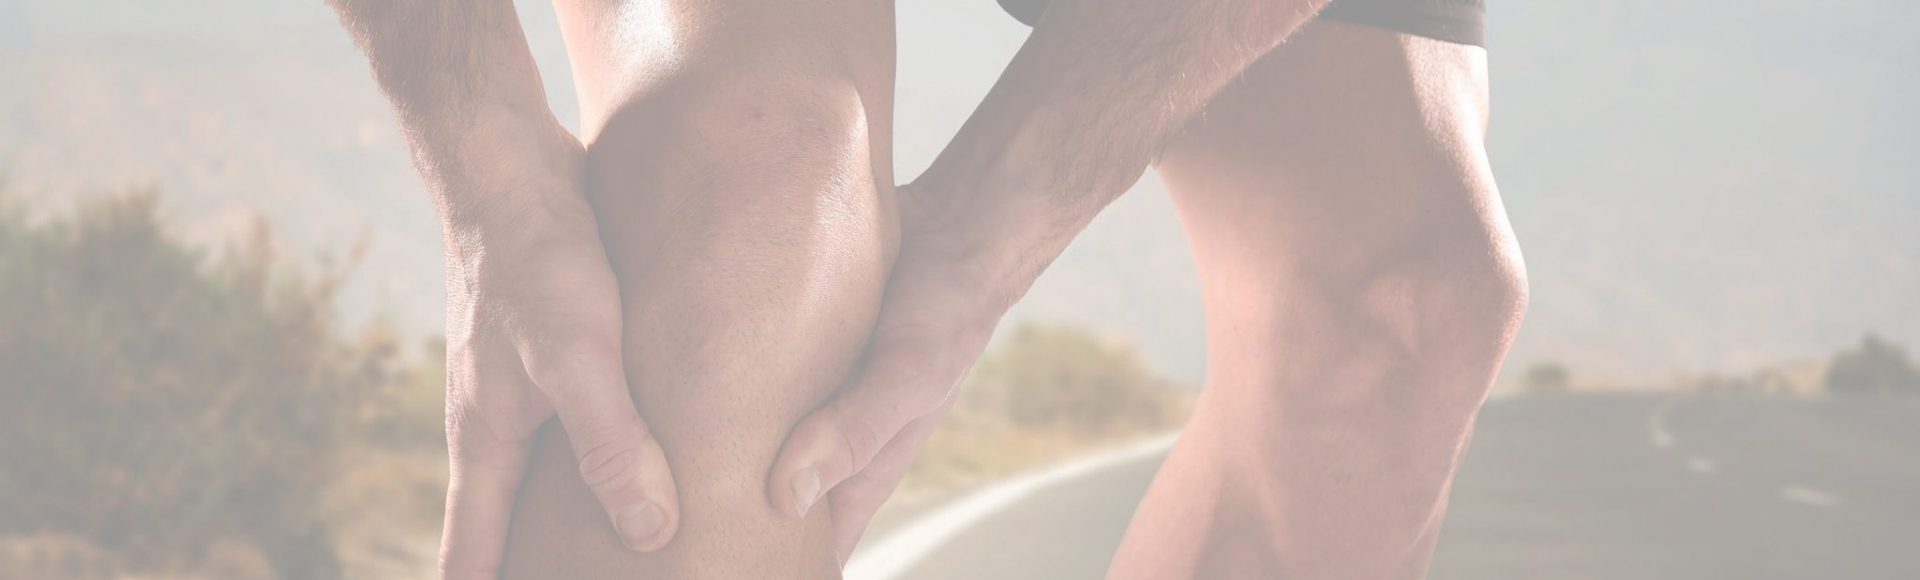 What Is Runner’s Knee & How Do You Treat It? by Your Marque Team